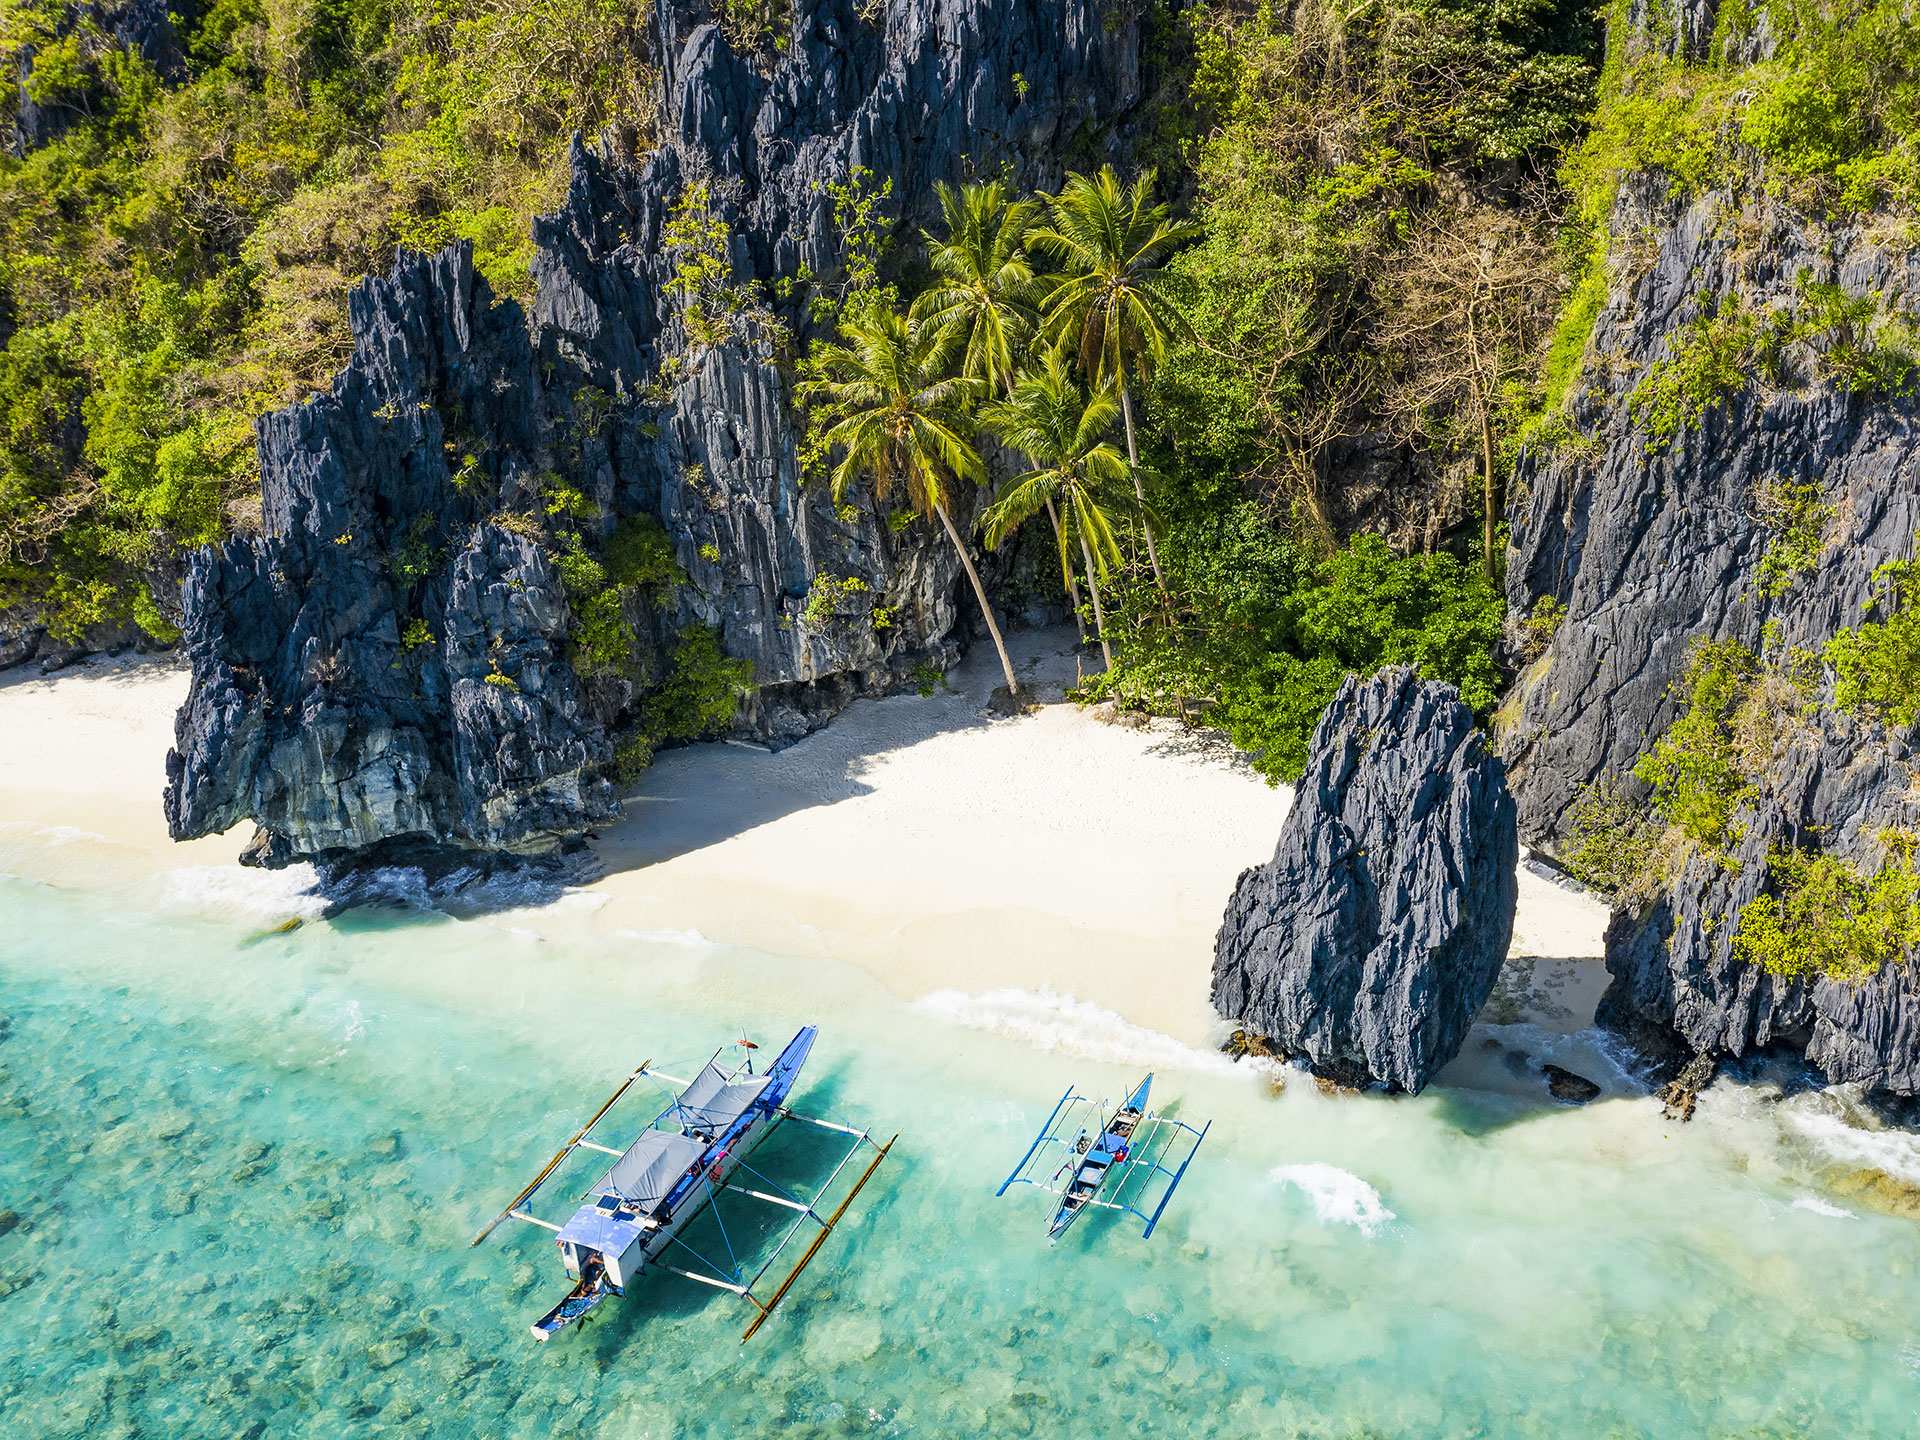 Best beaches in the world | Entalula Beach in El Nido, Palawan, Philippines